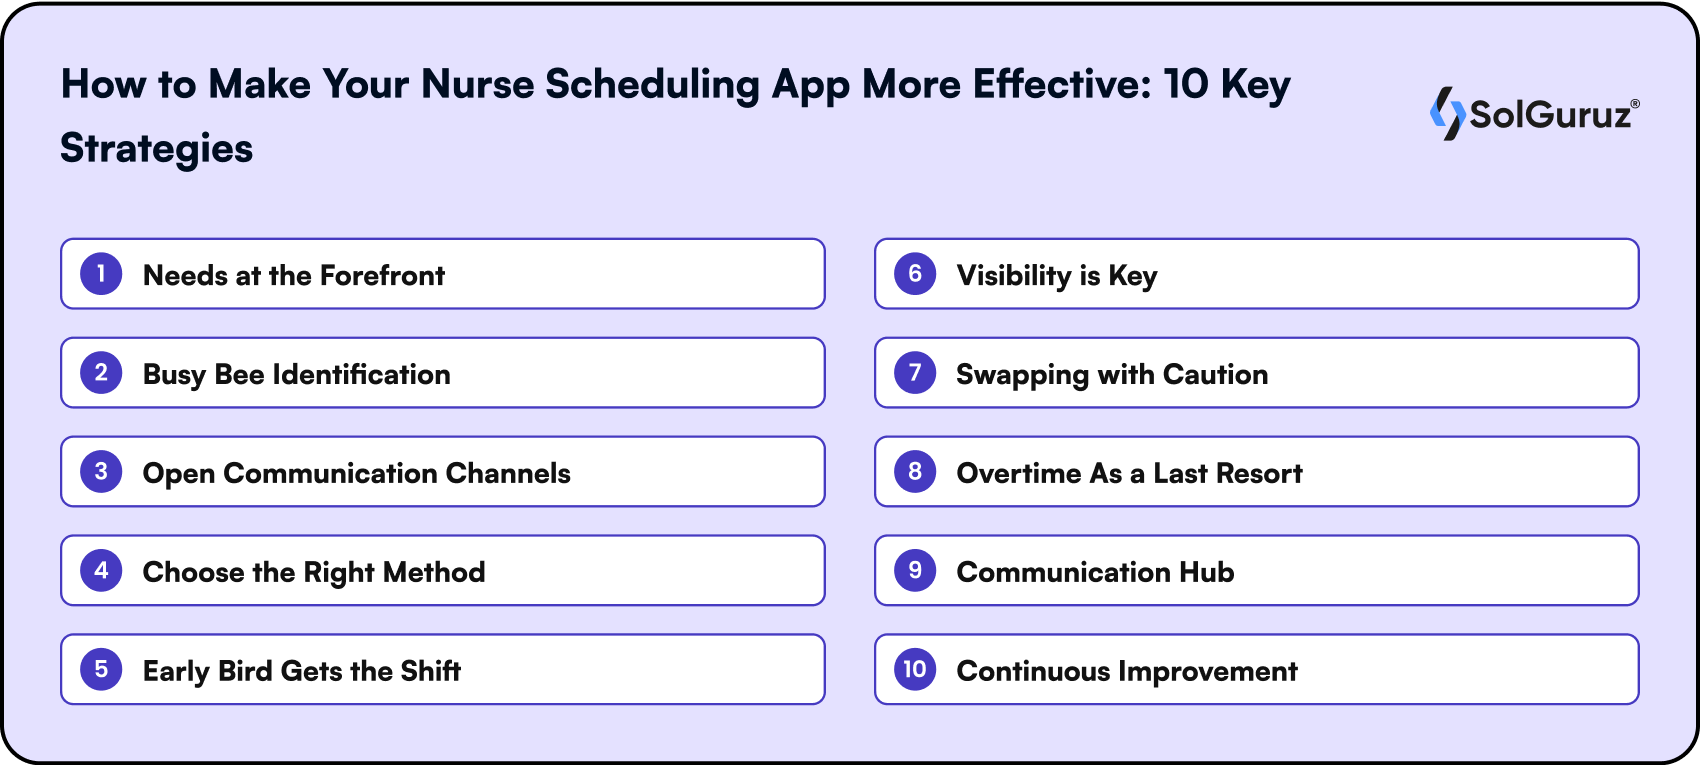 How to Make Your Nurse Scheduling App More Effective 10 Key Strategies